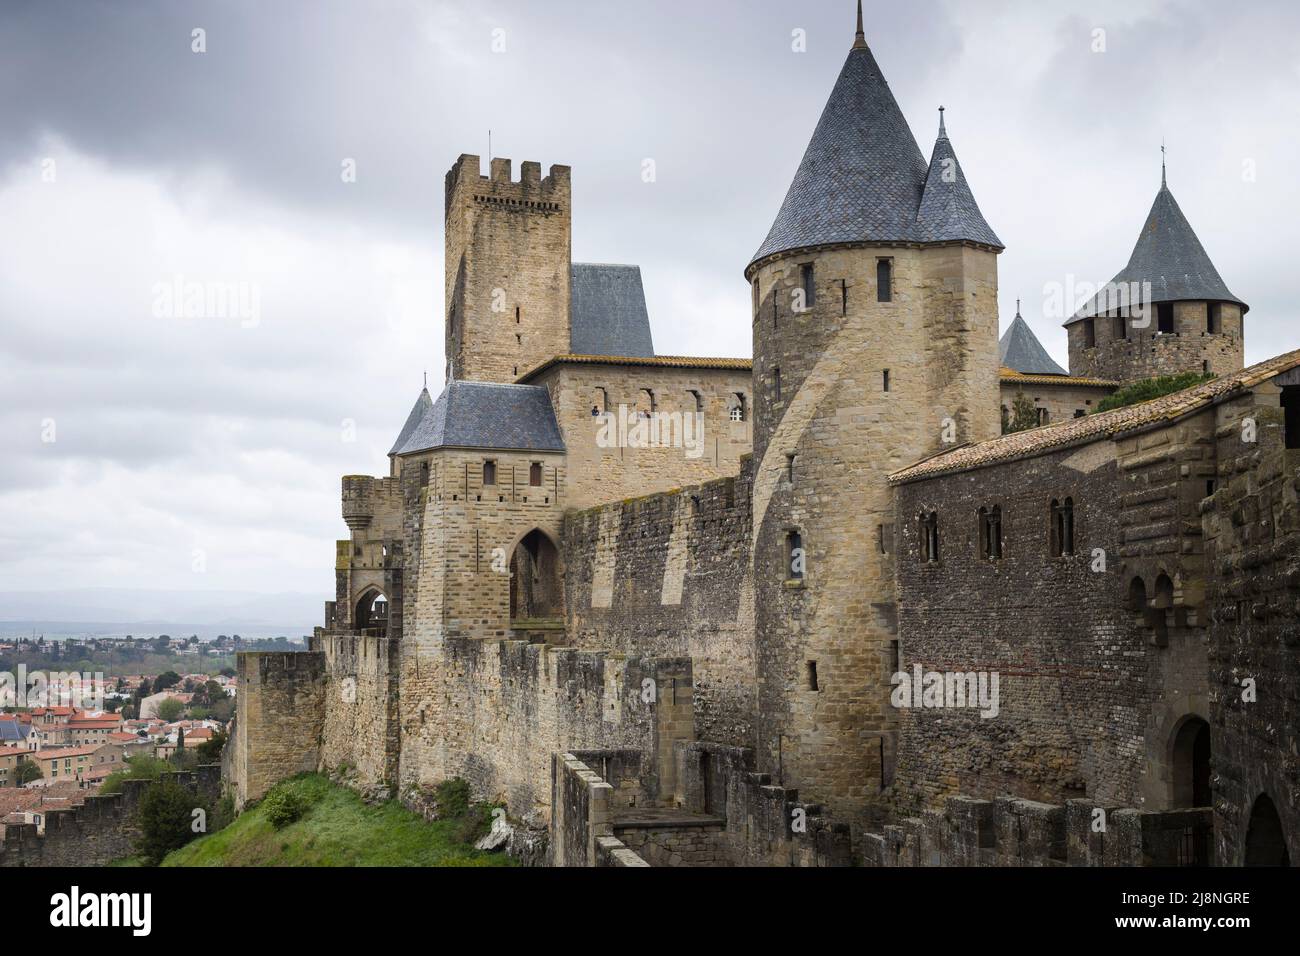 The Towers and Walls of the Fortified Medieval Town of Carcassonne, Aude, France, restored by Viollet-le-Duc in the 19th Century. Stock Photo